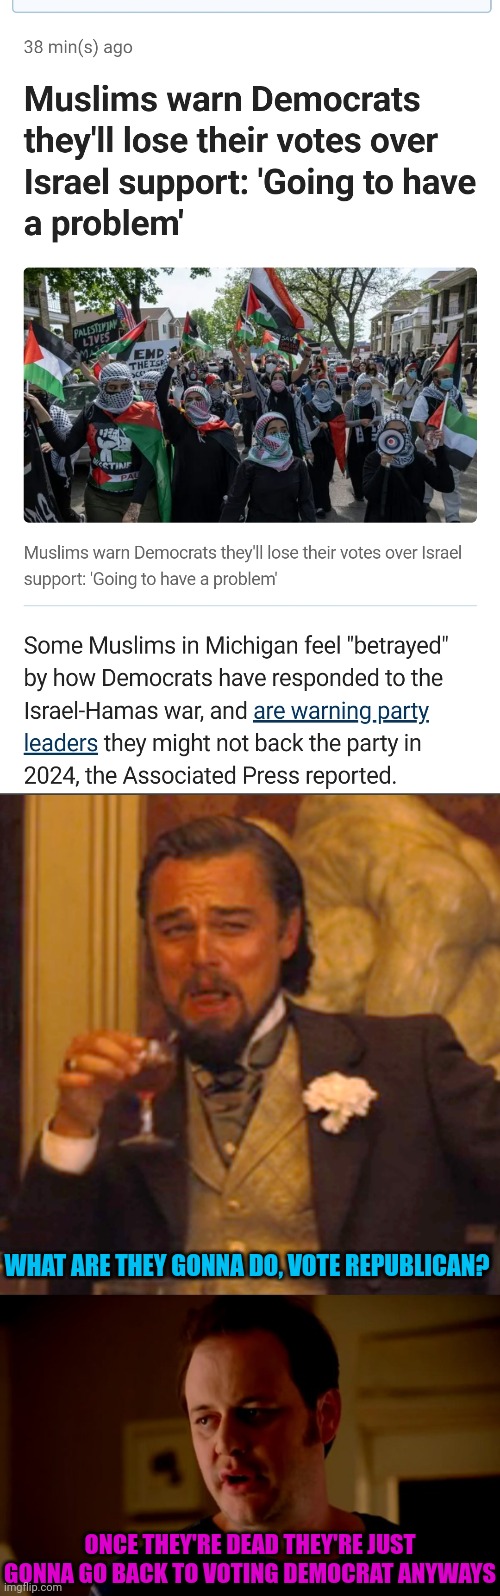 WHAT ARE THEY GONNA DO, VOTE REPUBLICAN? ONCE THEY'RE DEAD THEY'RE JUST GONNA GO BACK TO VOTING DEMOCRAT ANYWAYS | image tagged in memes,democrats,muslims,voting | made w/ Imgflip meme maker